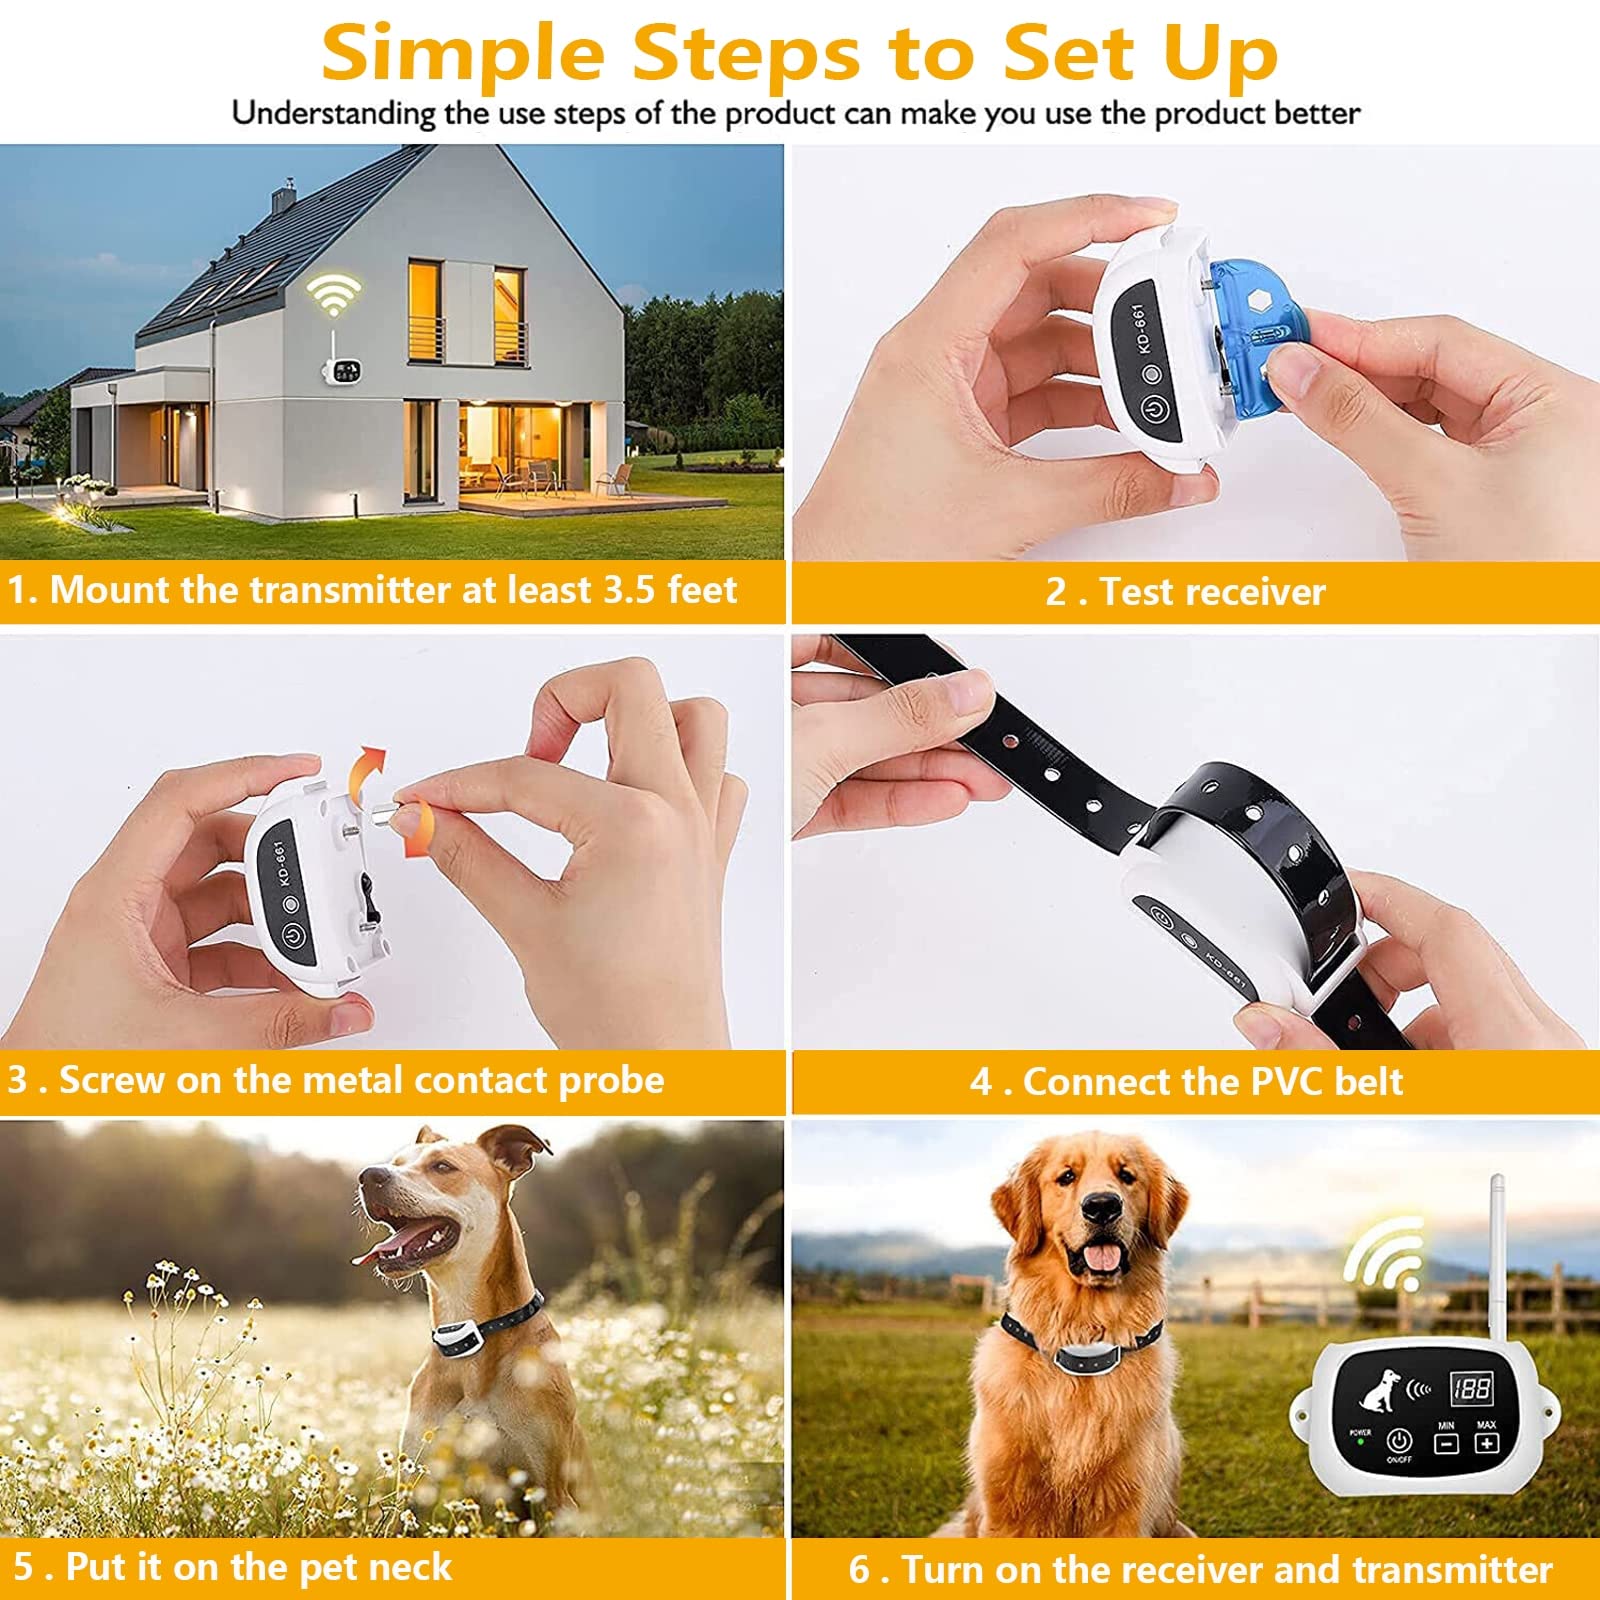 HEXIEDEN Wireless Dog Fence,Outside Stubborn Dog Boundary Fence System,Electric Pet Dogs Containment System,Adjustable Range Up to 1640ft,with IP67 Waterproof Training Collar,for 1 2 3 Dogs,for1dog